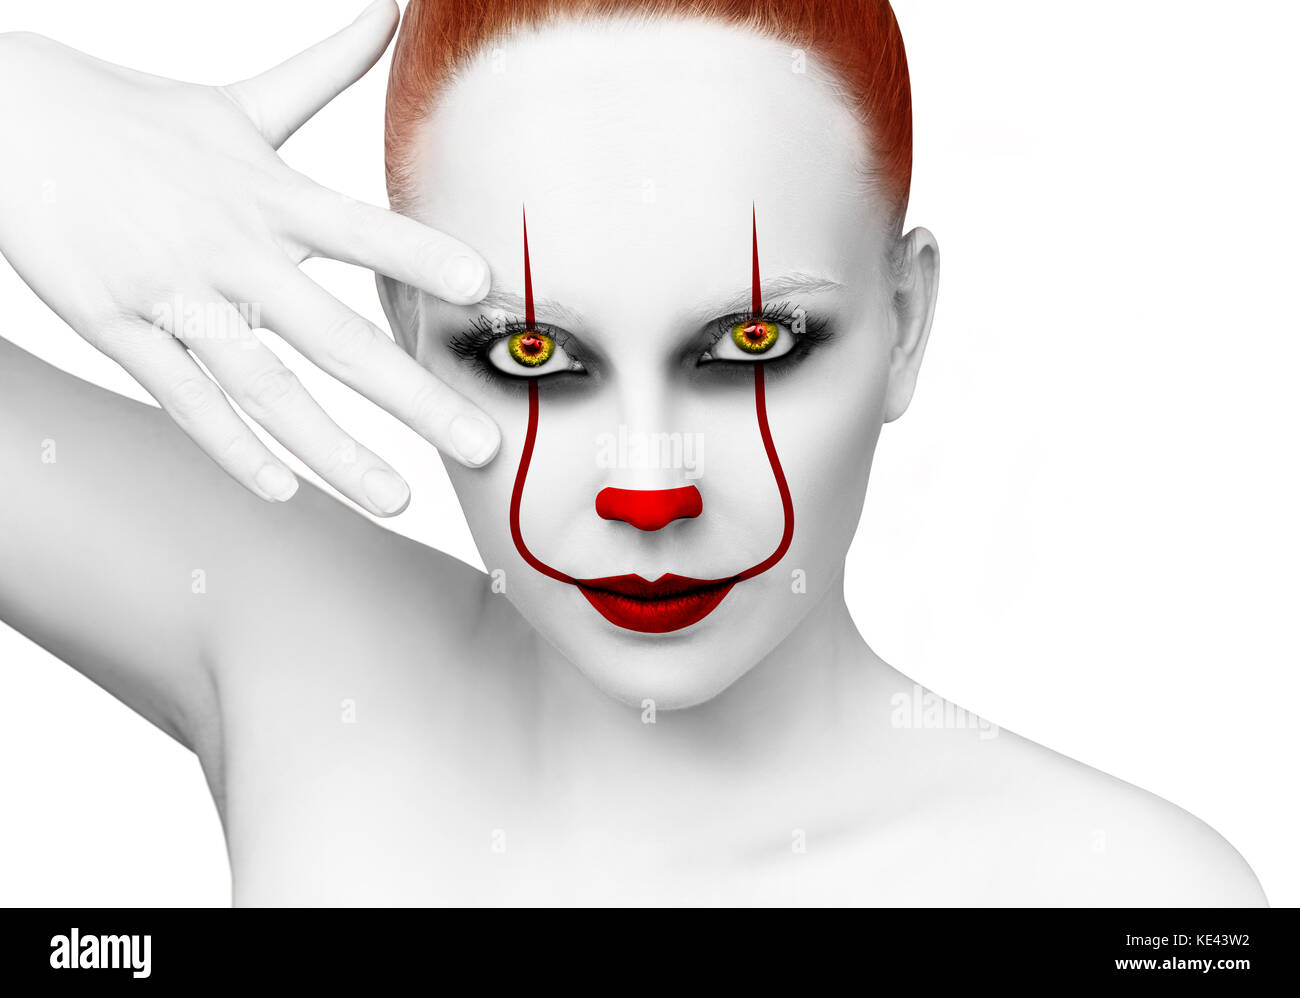 Redhead woman with scary clown grimm. Stock Photo